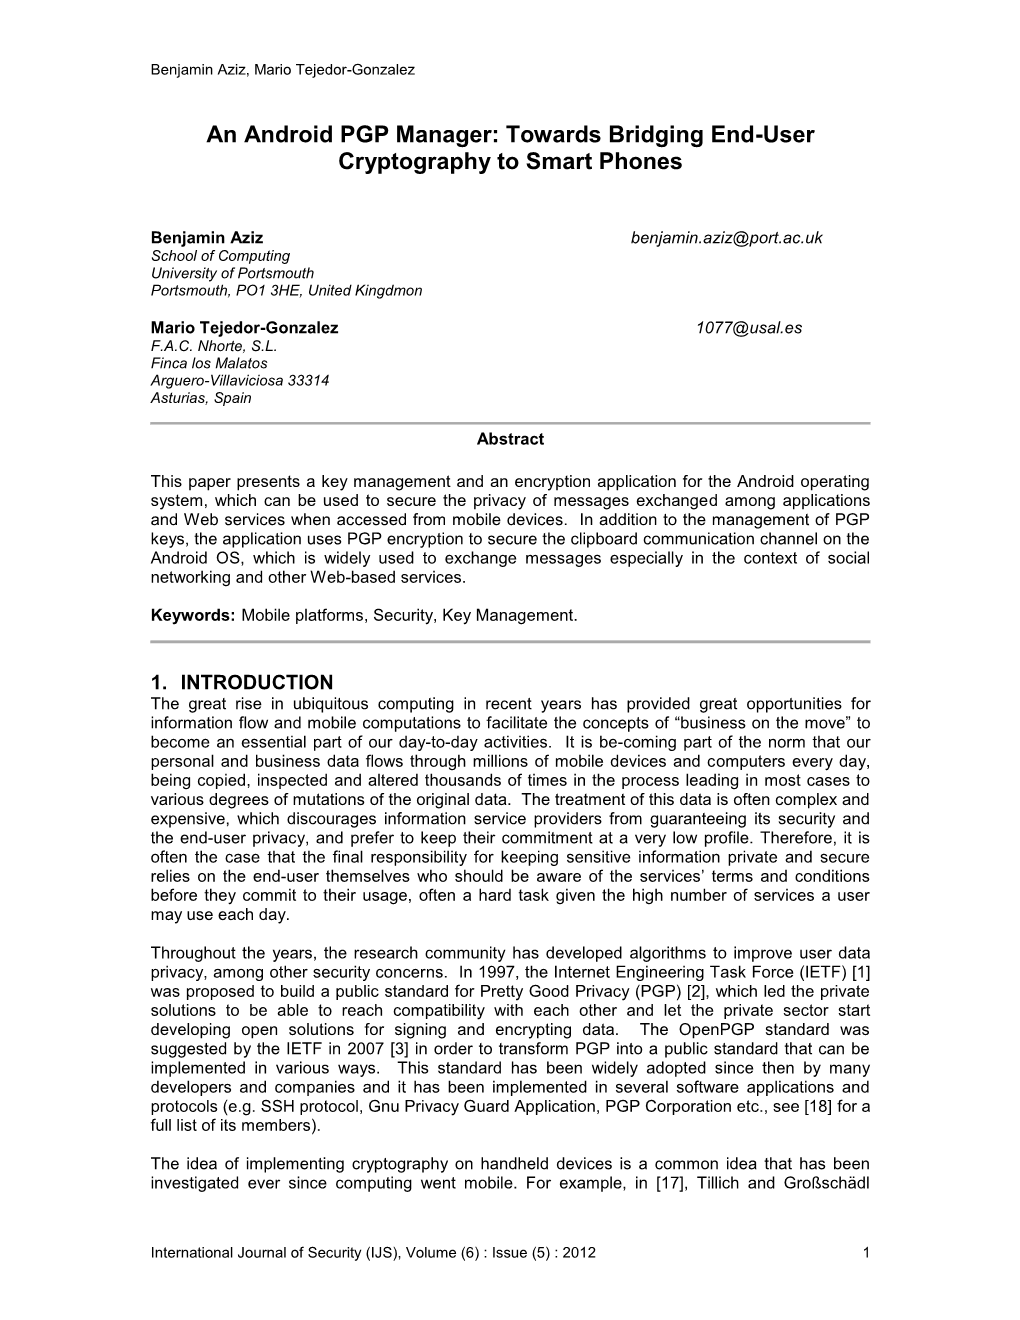 An Android PGP Manager: Towards Bridging End-User Cryptography to Smart Phones